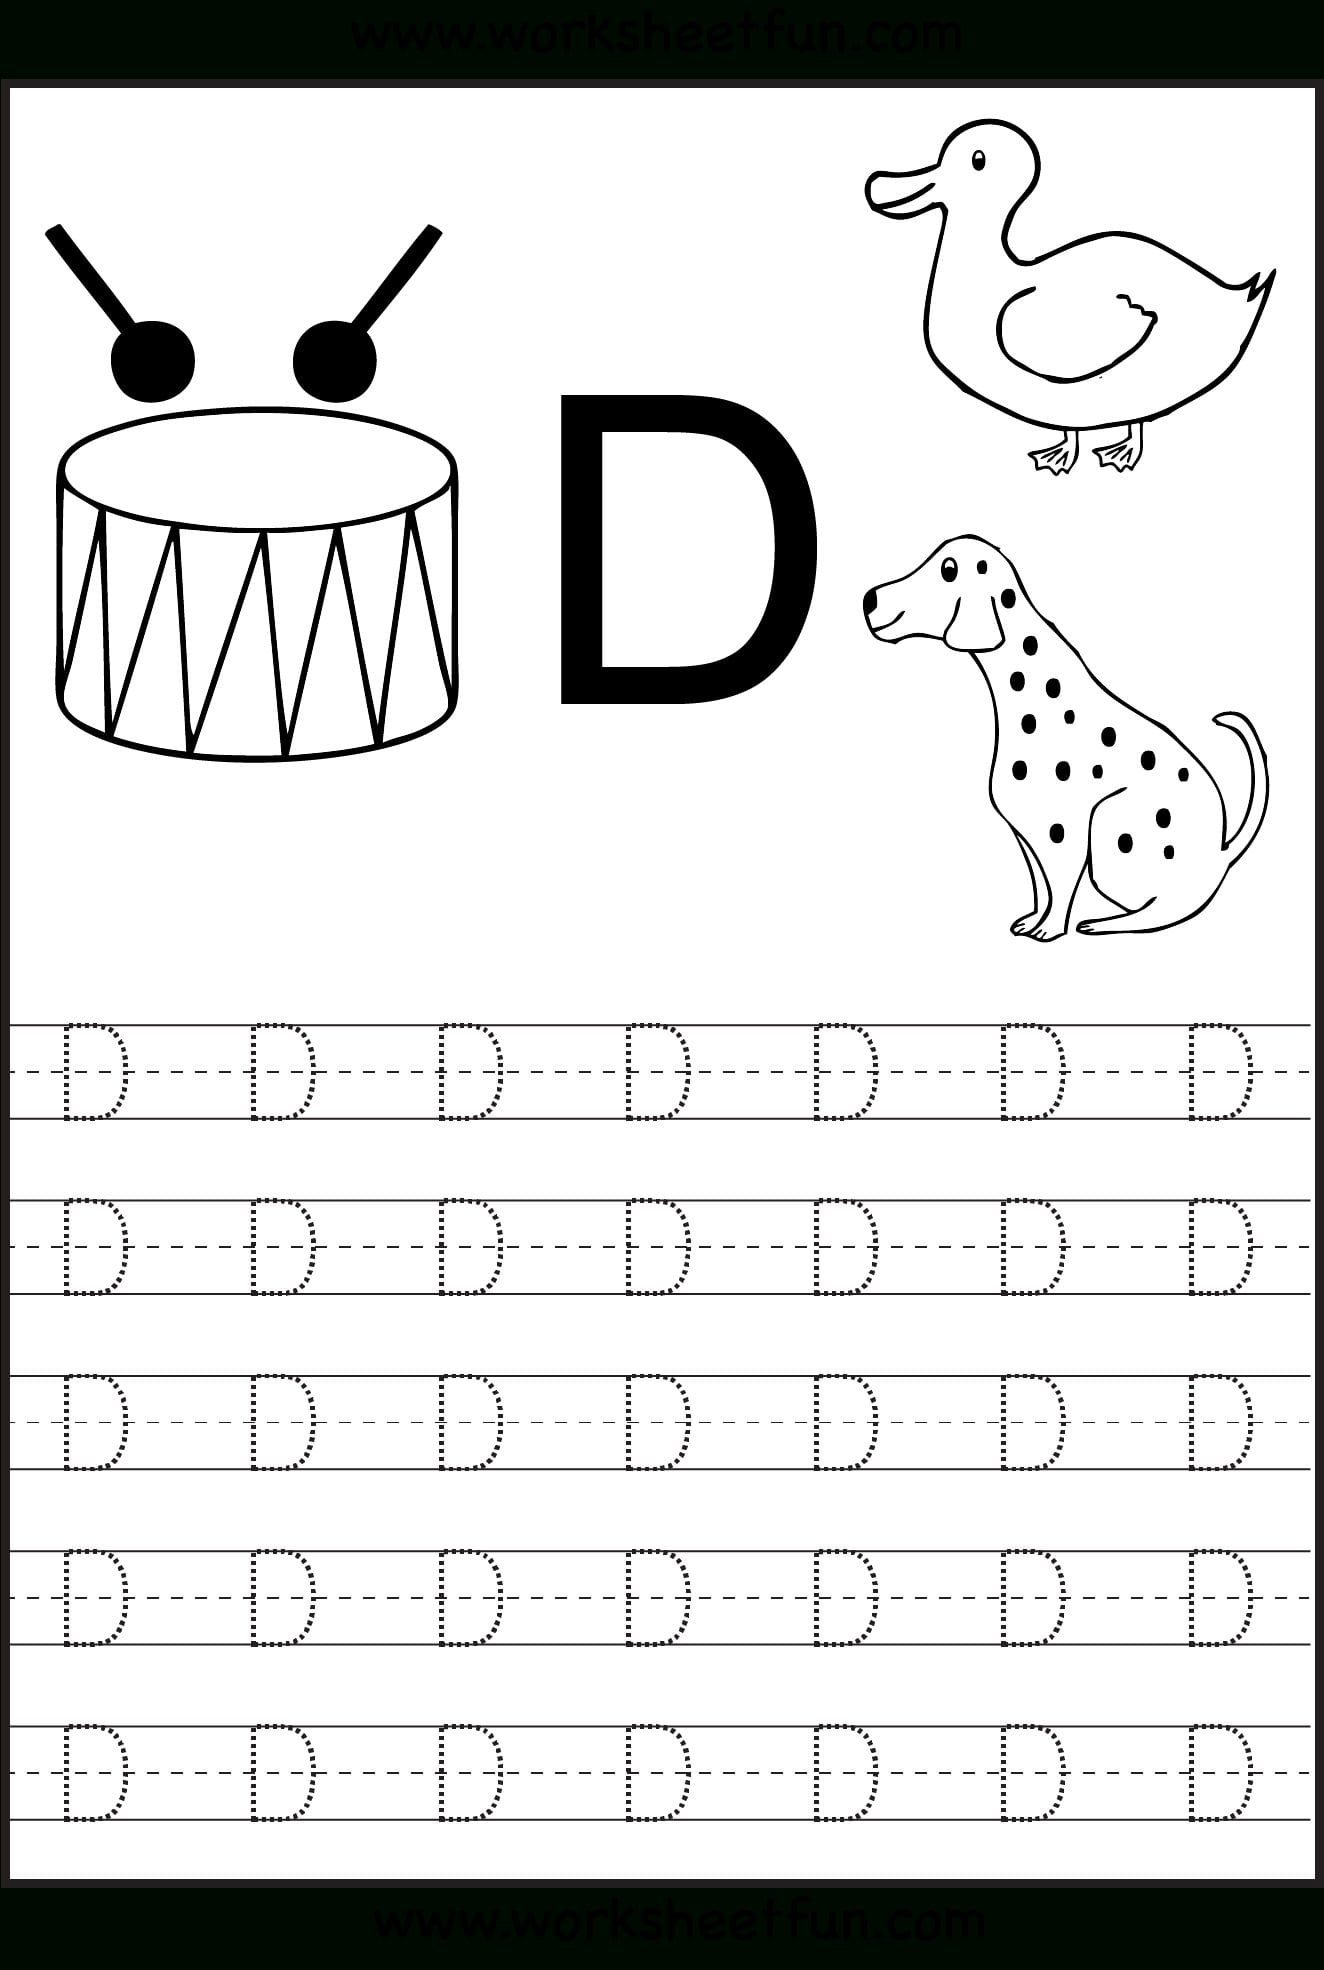 Any Free Abc Letter Tracing Worksheets